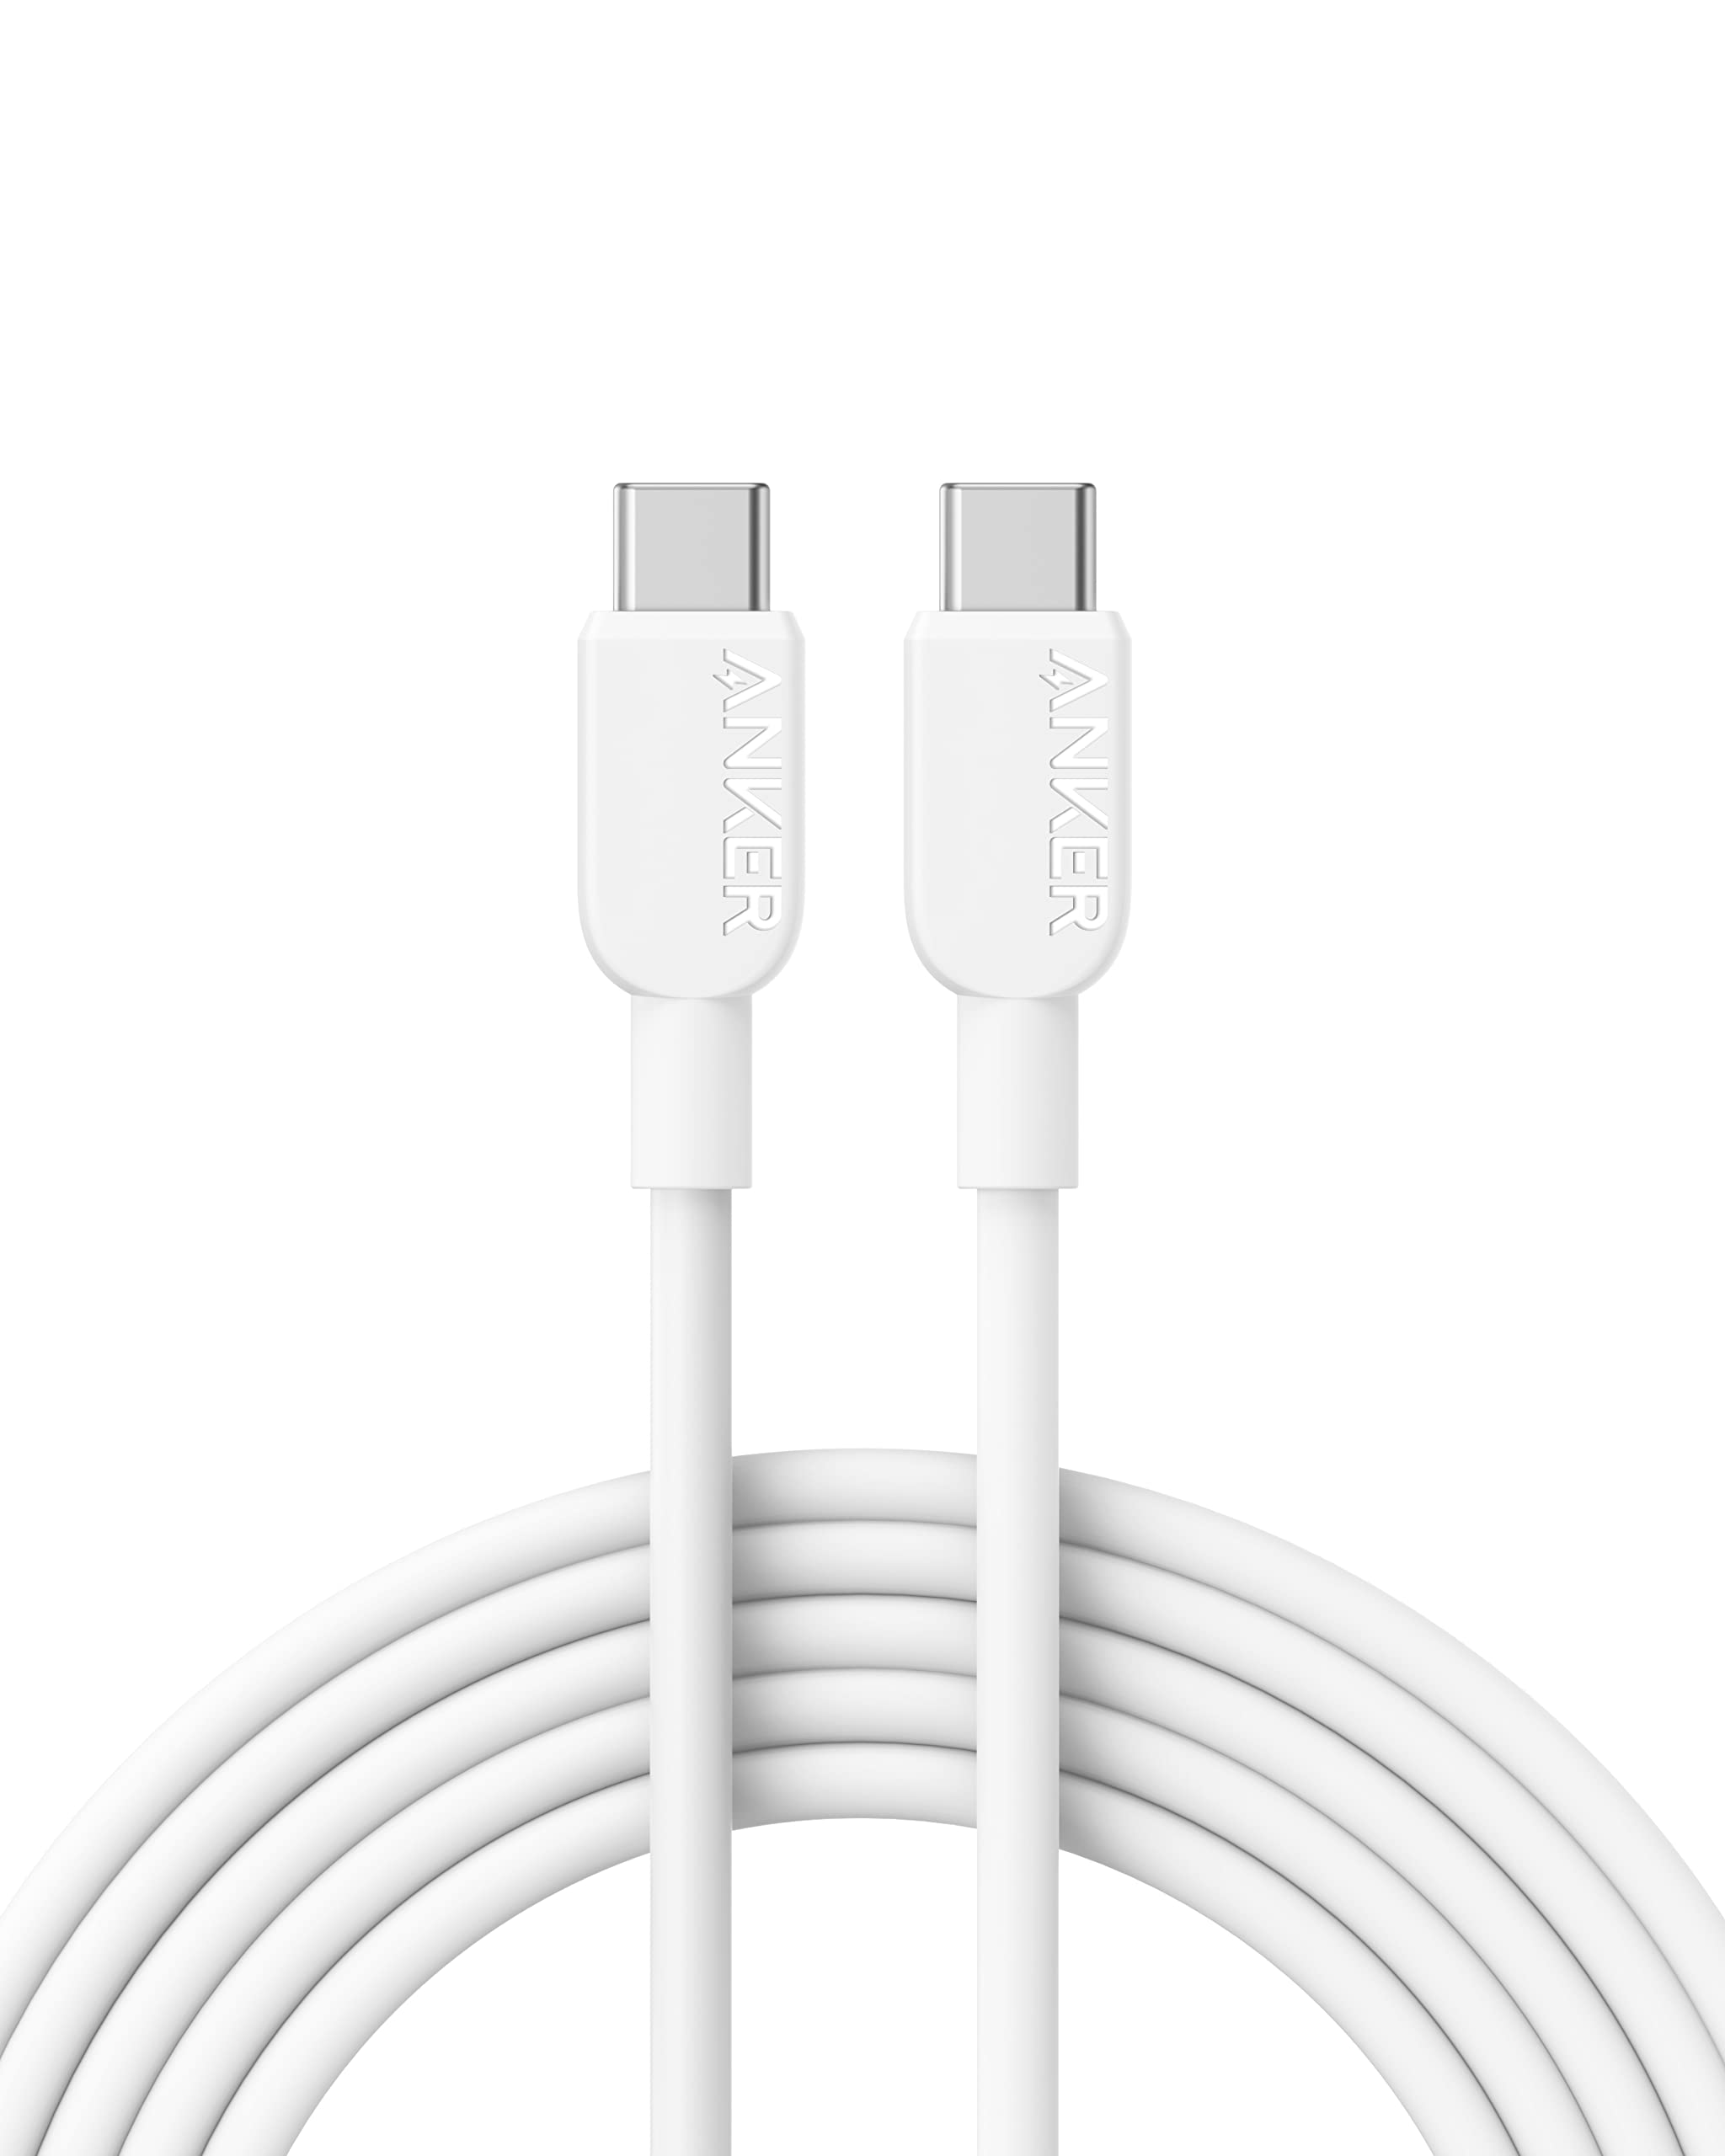 Usb C to Magsafe 3 Cable - Anker US